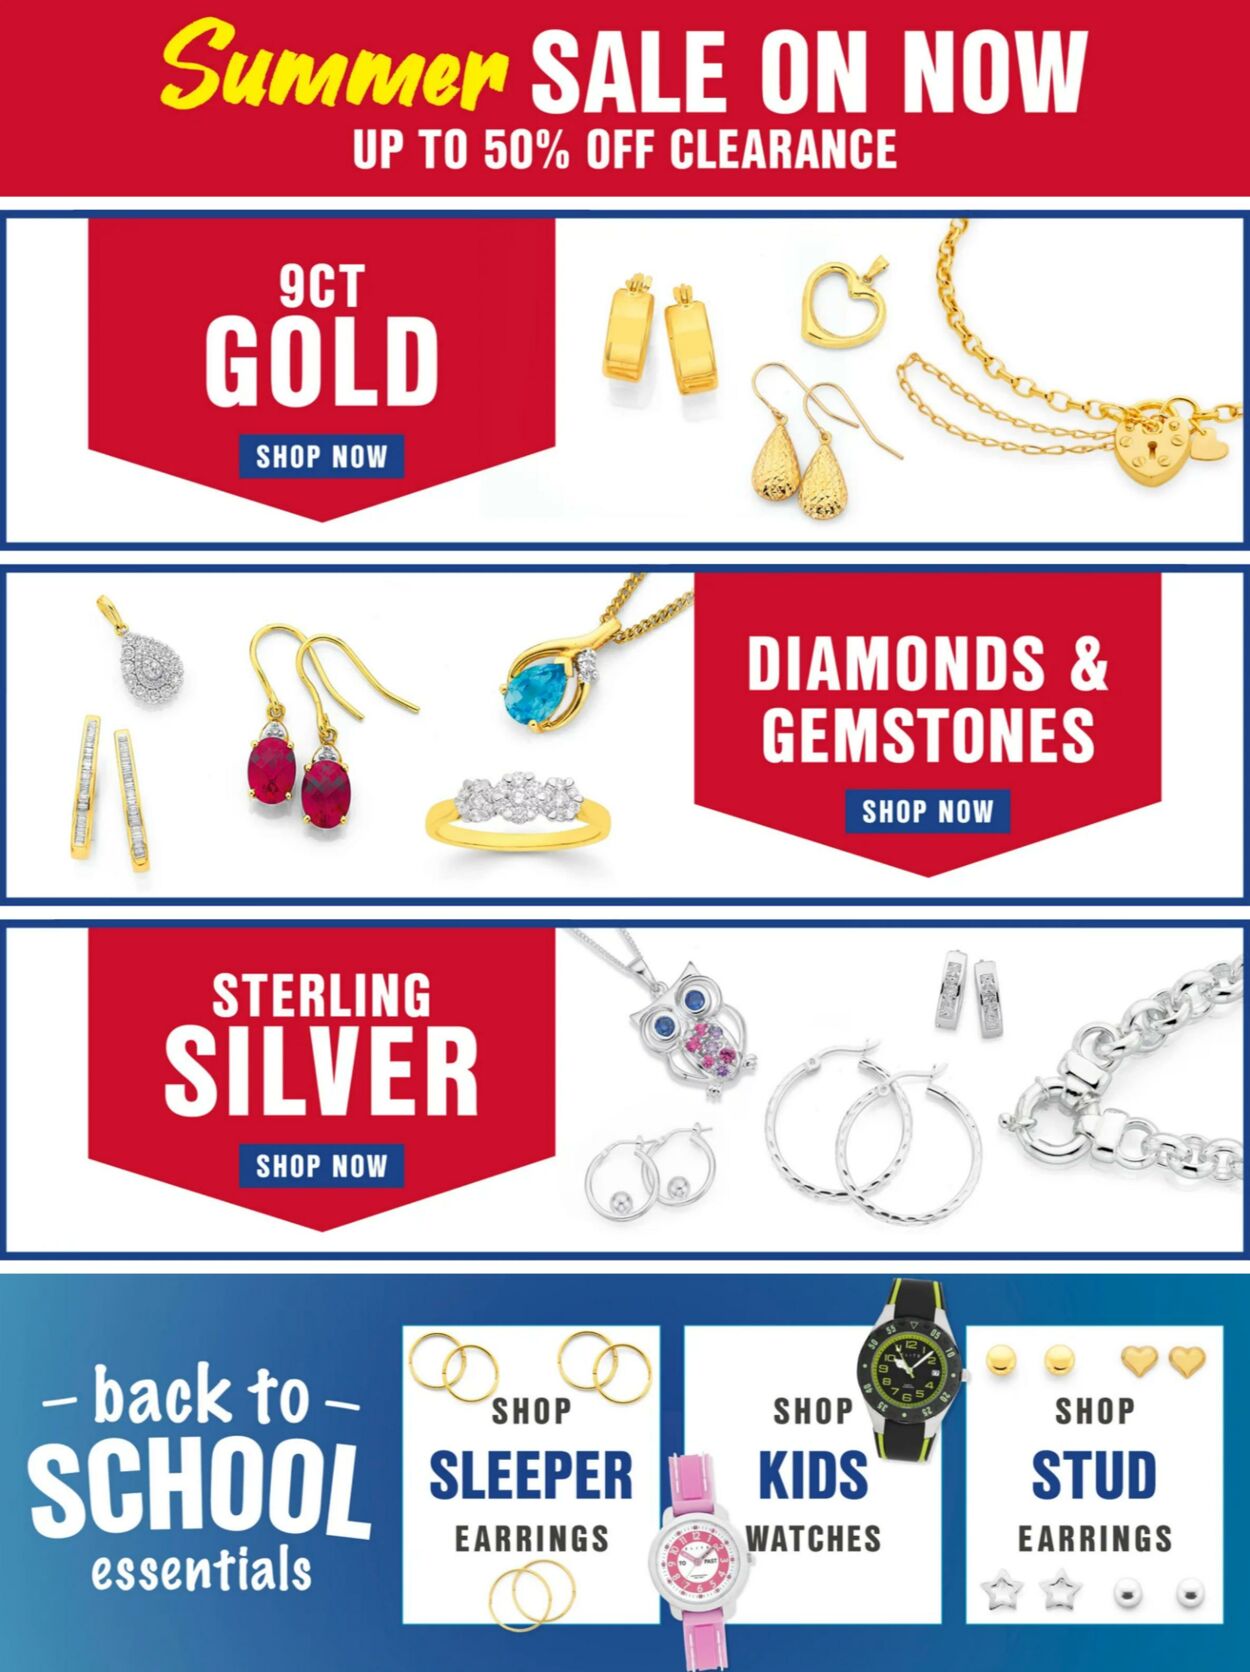 Catalogue Prouds The Jewellers 15.05.2023 - 04.06.2023